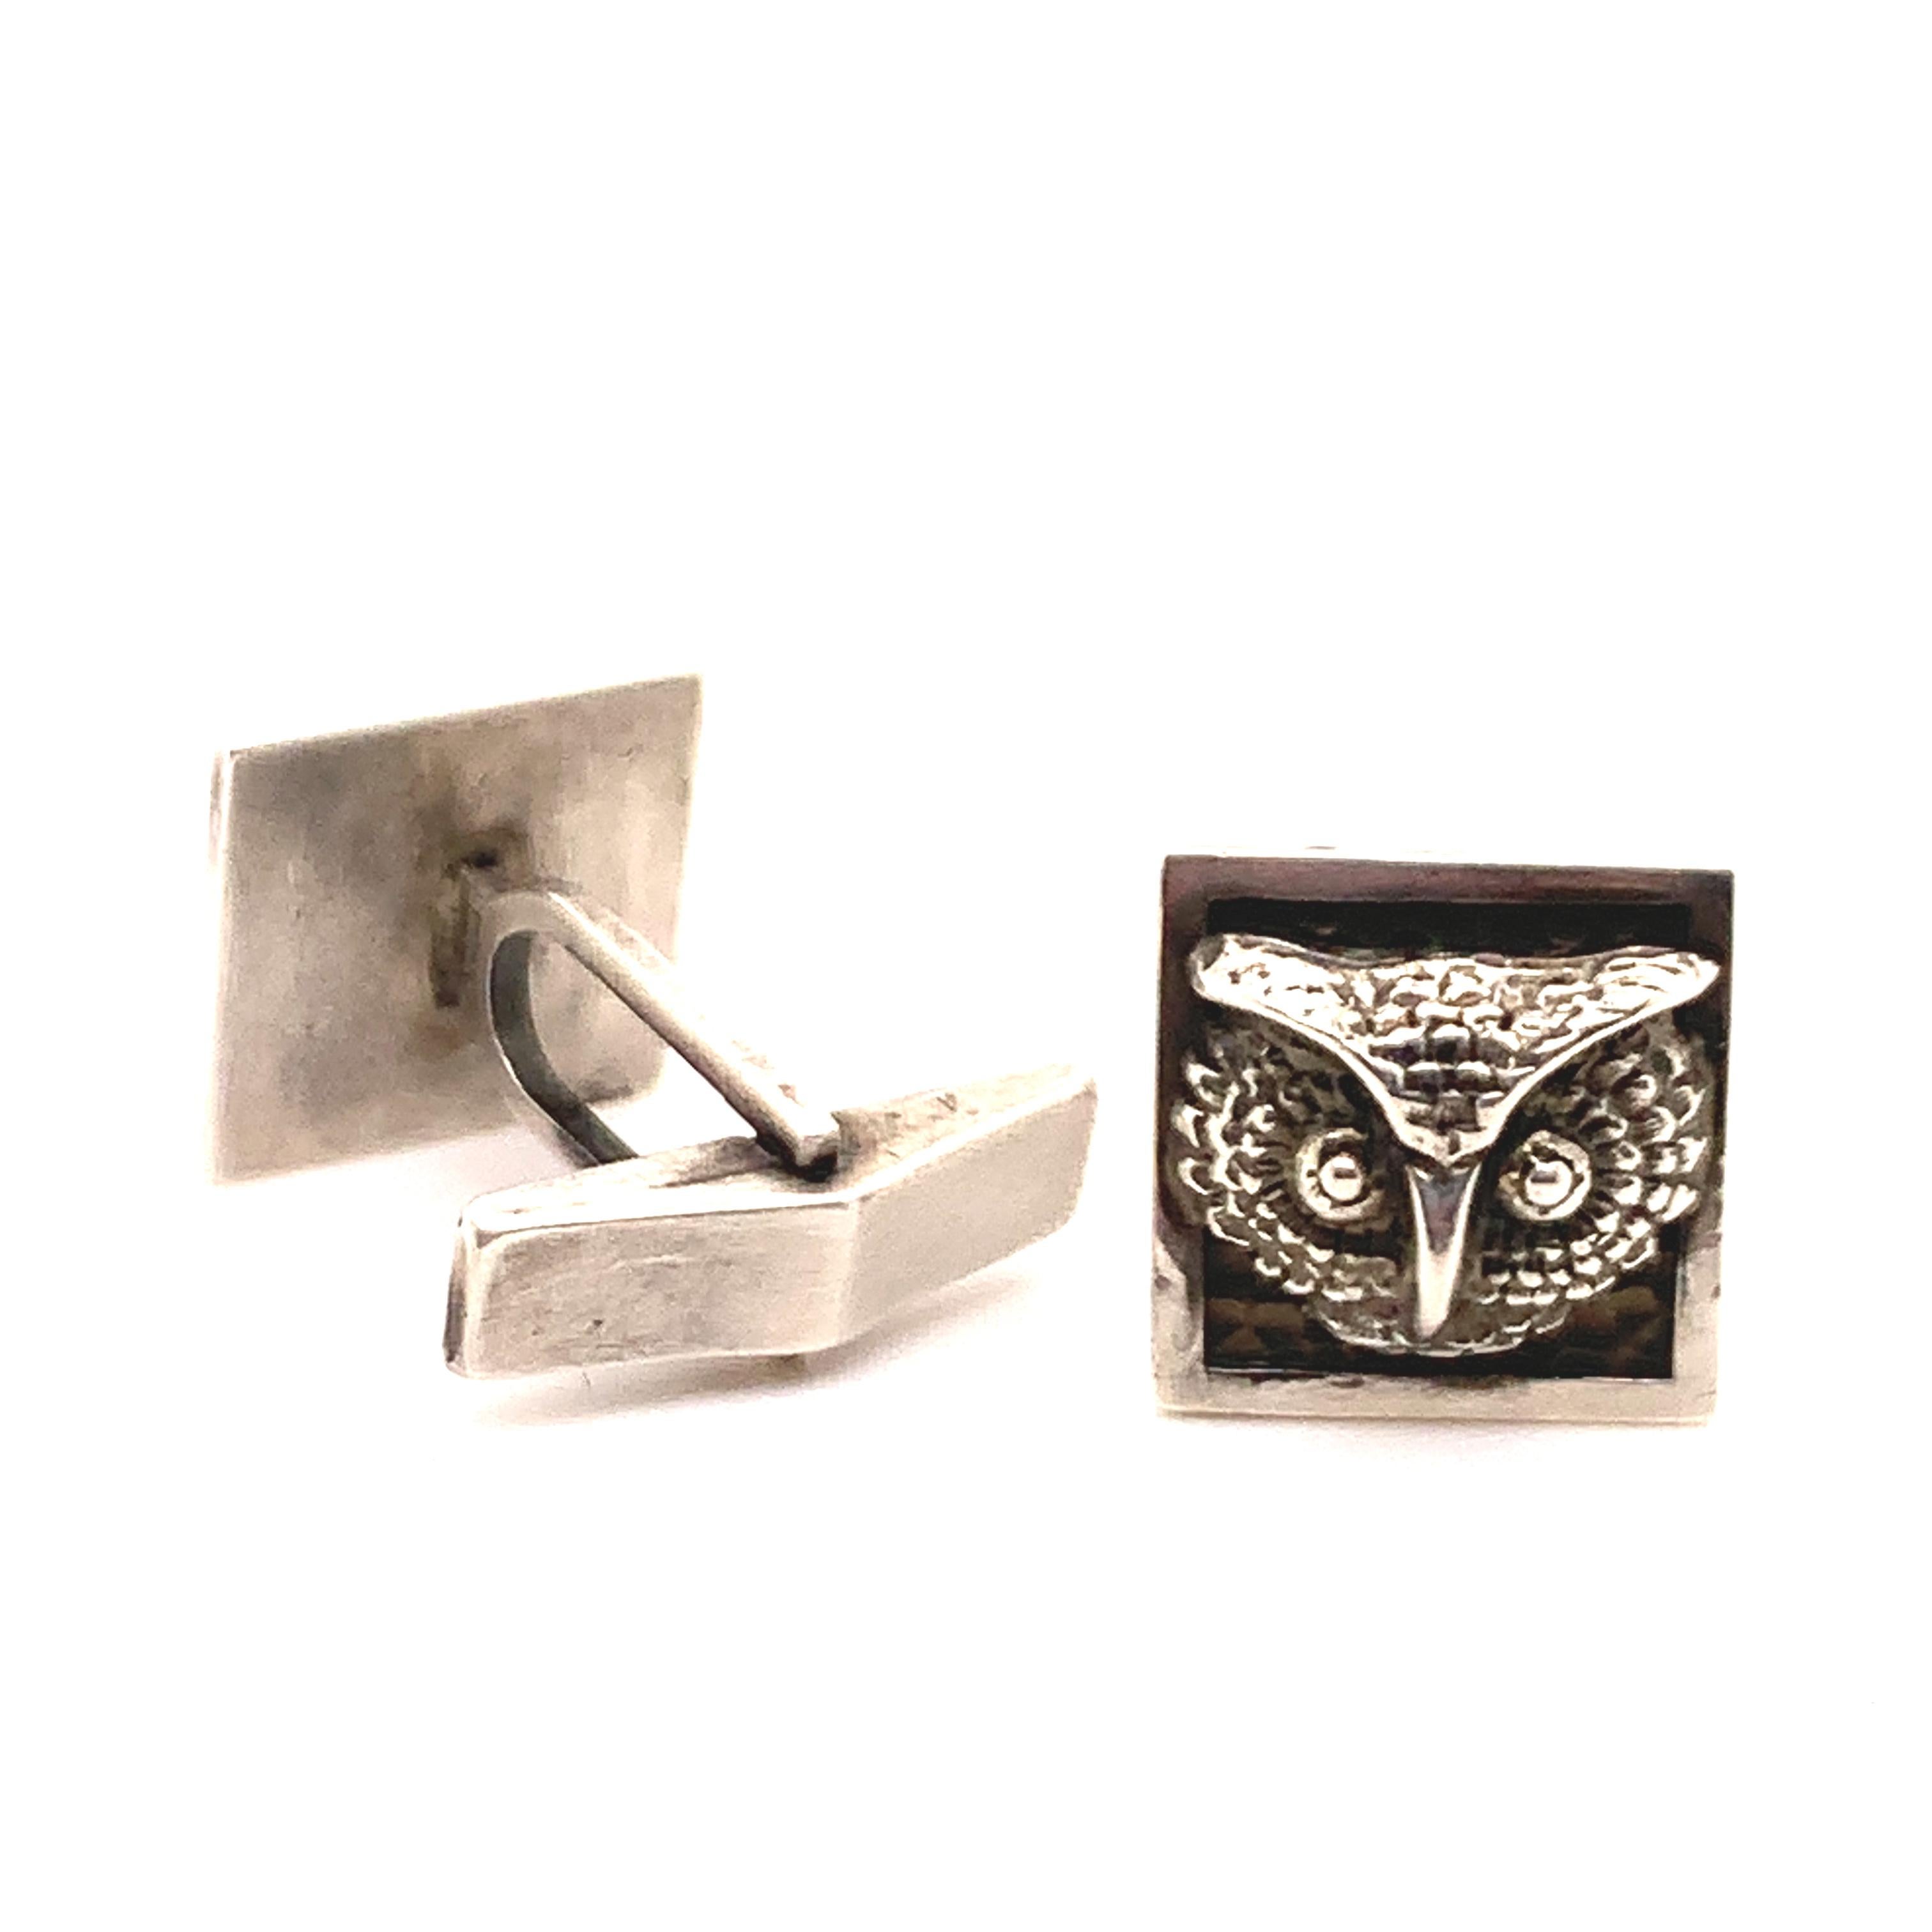 Sterling silver cufflinks, with applied three-dimensional figural 